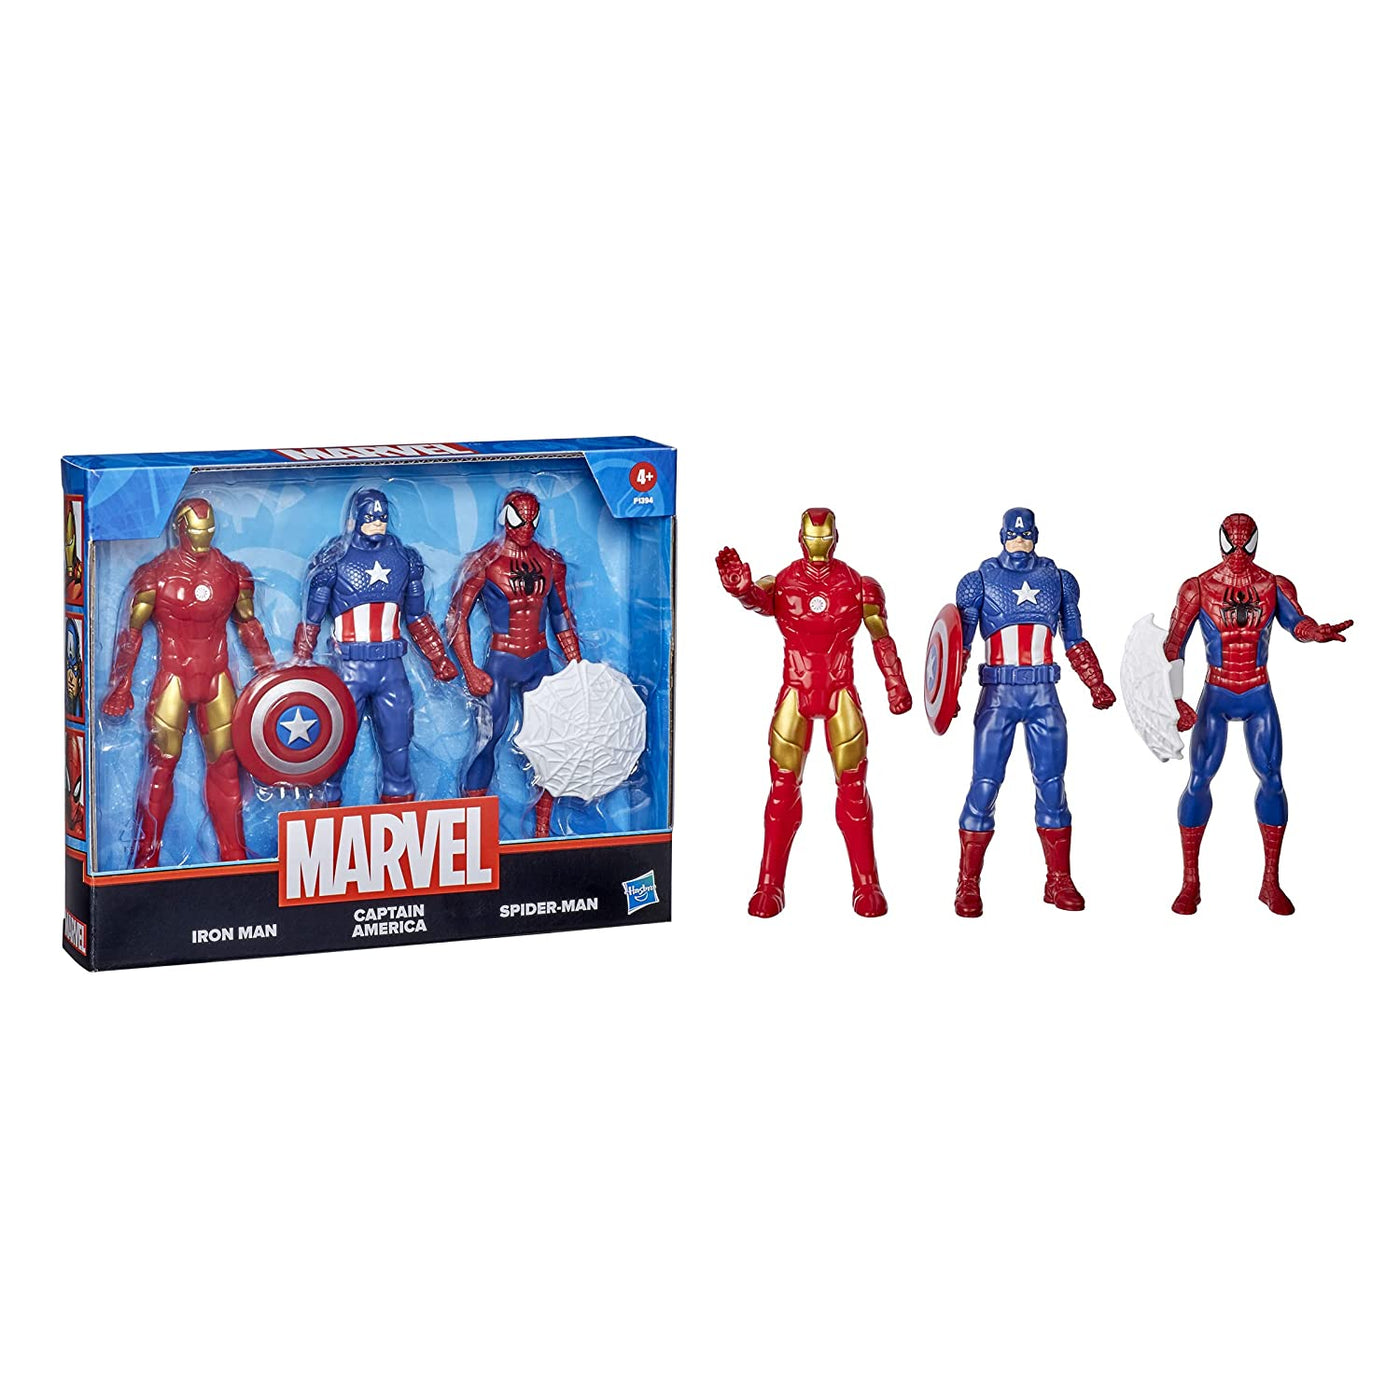 Marvel Action Figure: Iron Man, Captain America and Spider Man - Pack of 3, 6 Inch | Hasbro